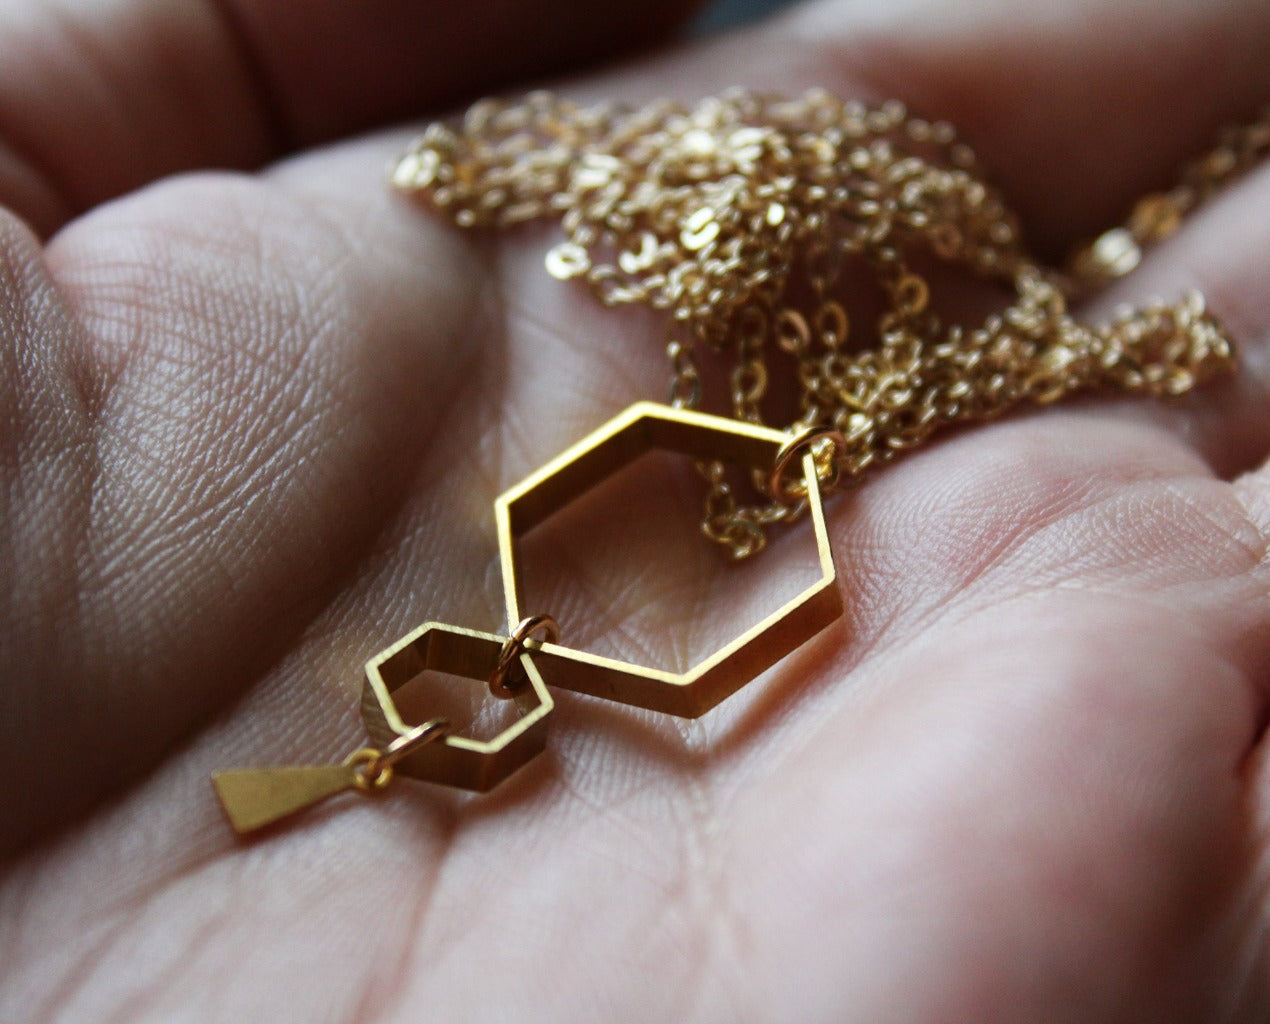 Hive necklace